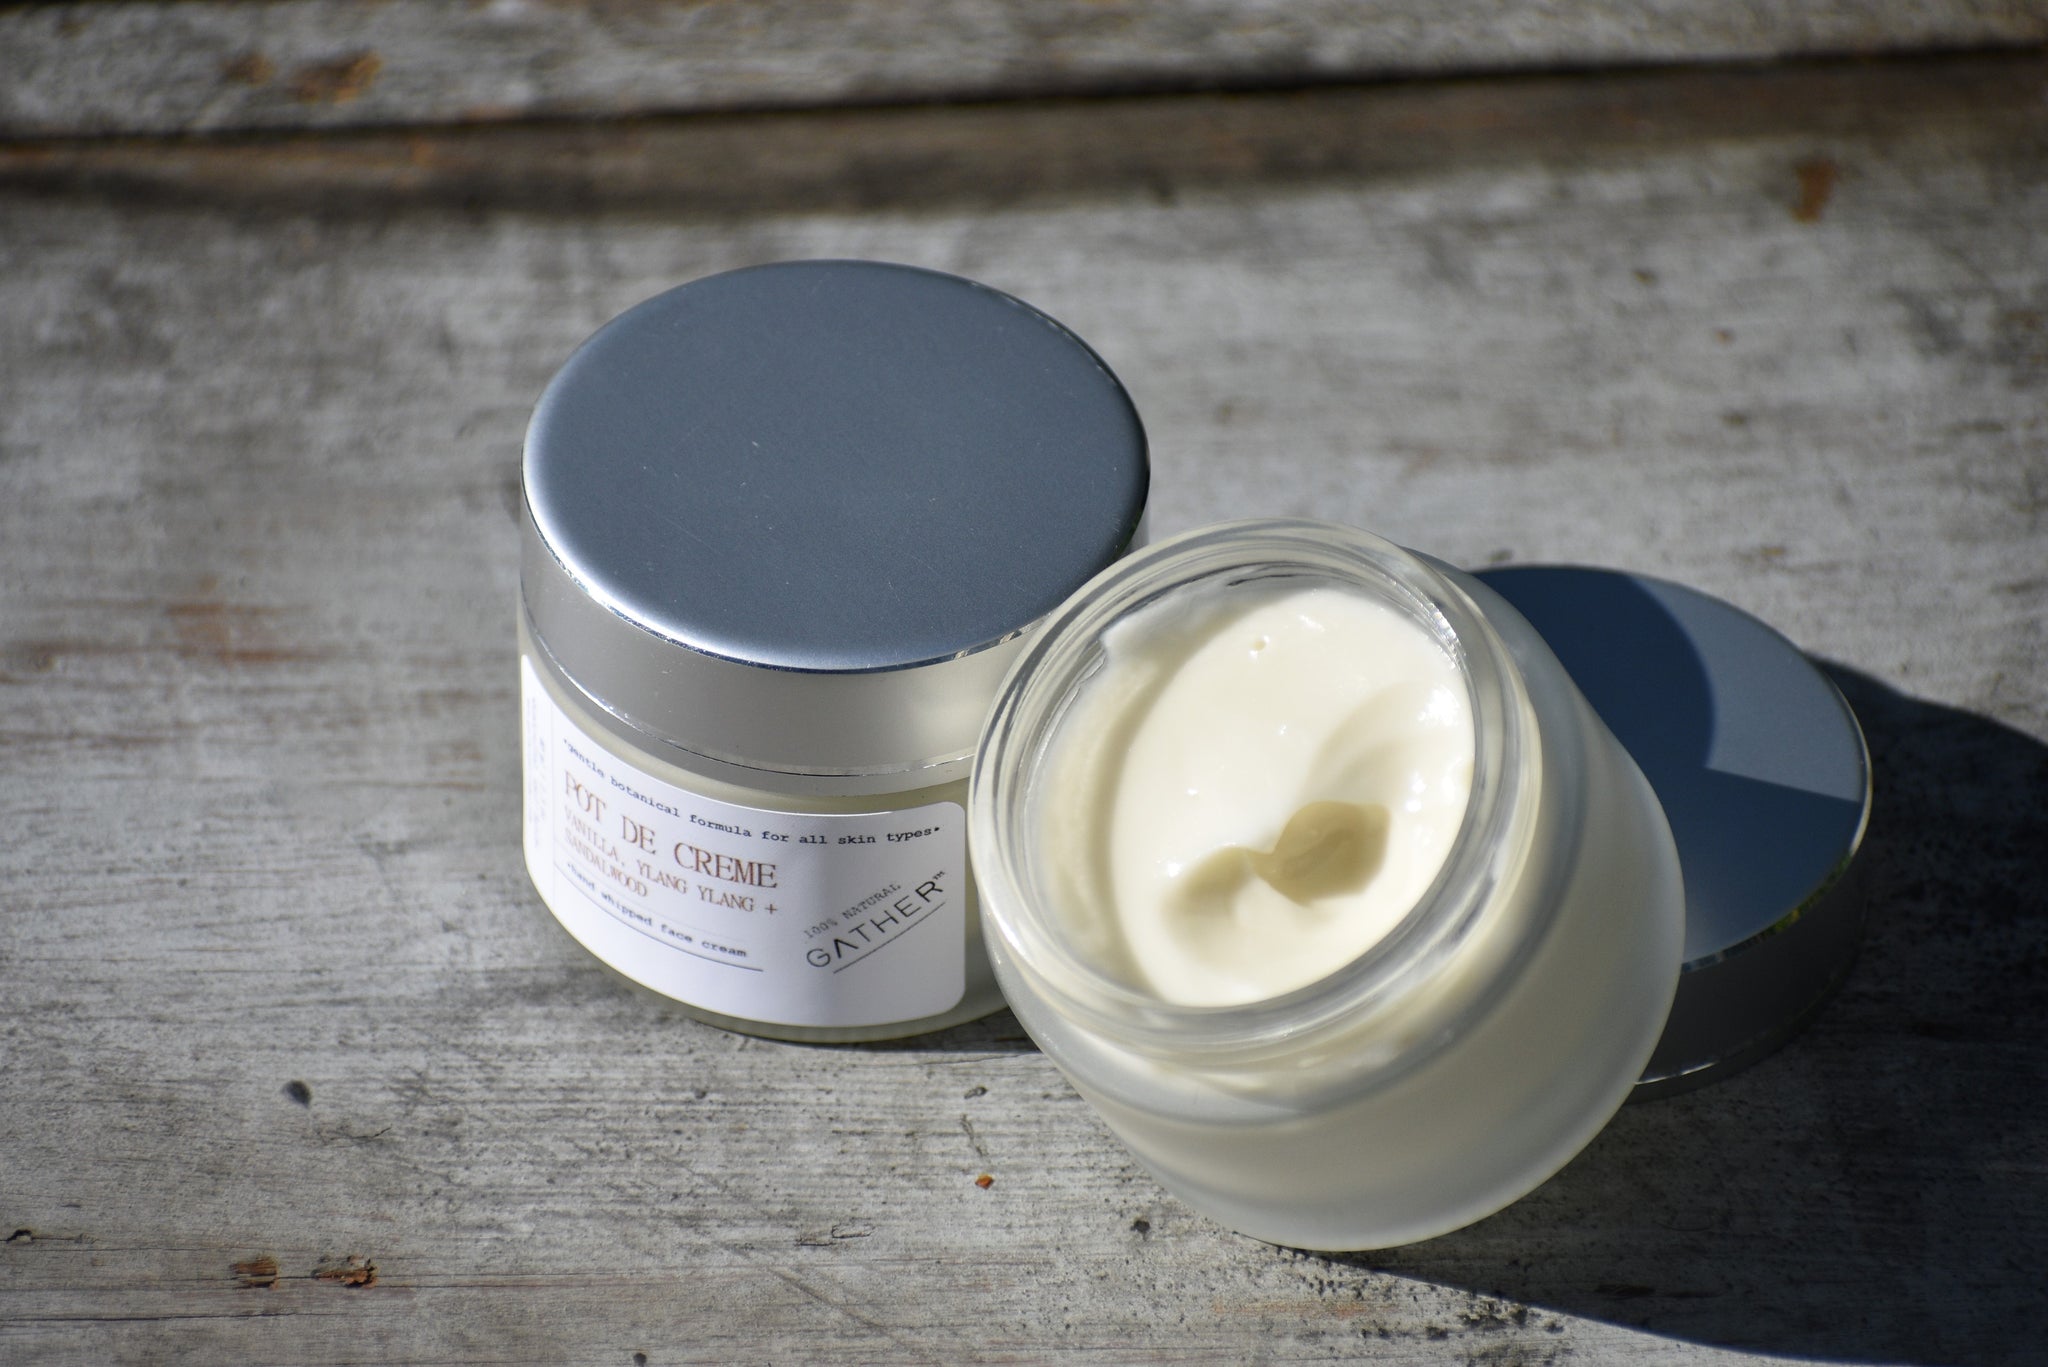 POT DE CREME - Gentle Luxury Face Cream - 100% natural, hand whipped - –  GATHER